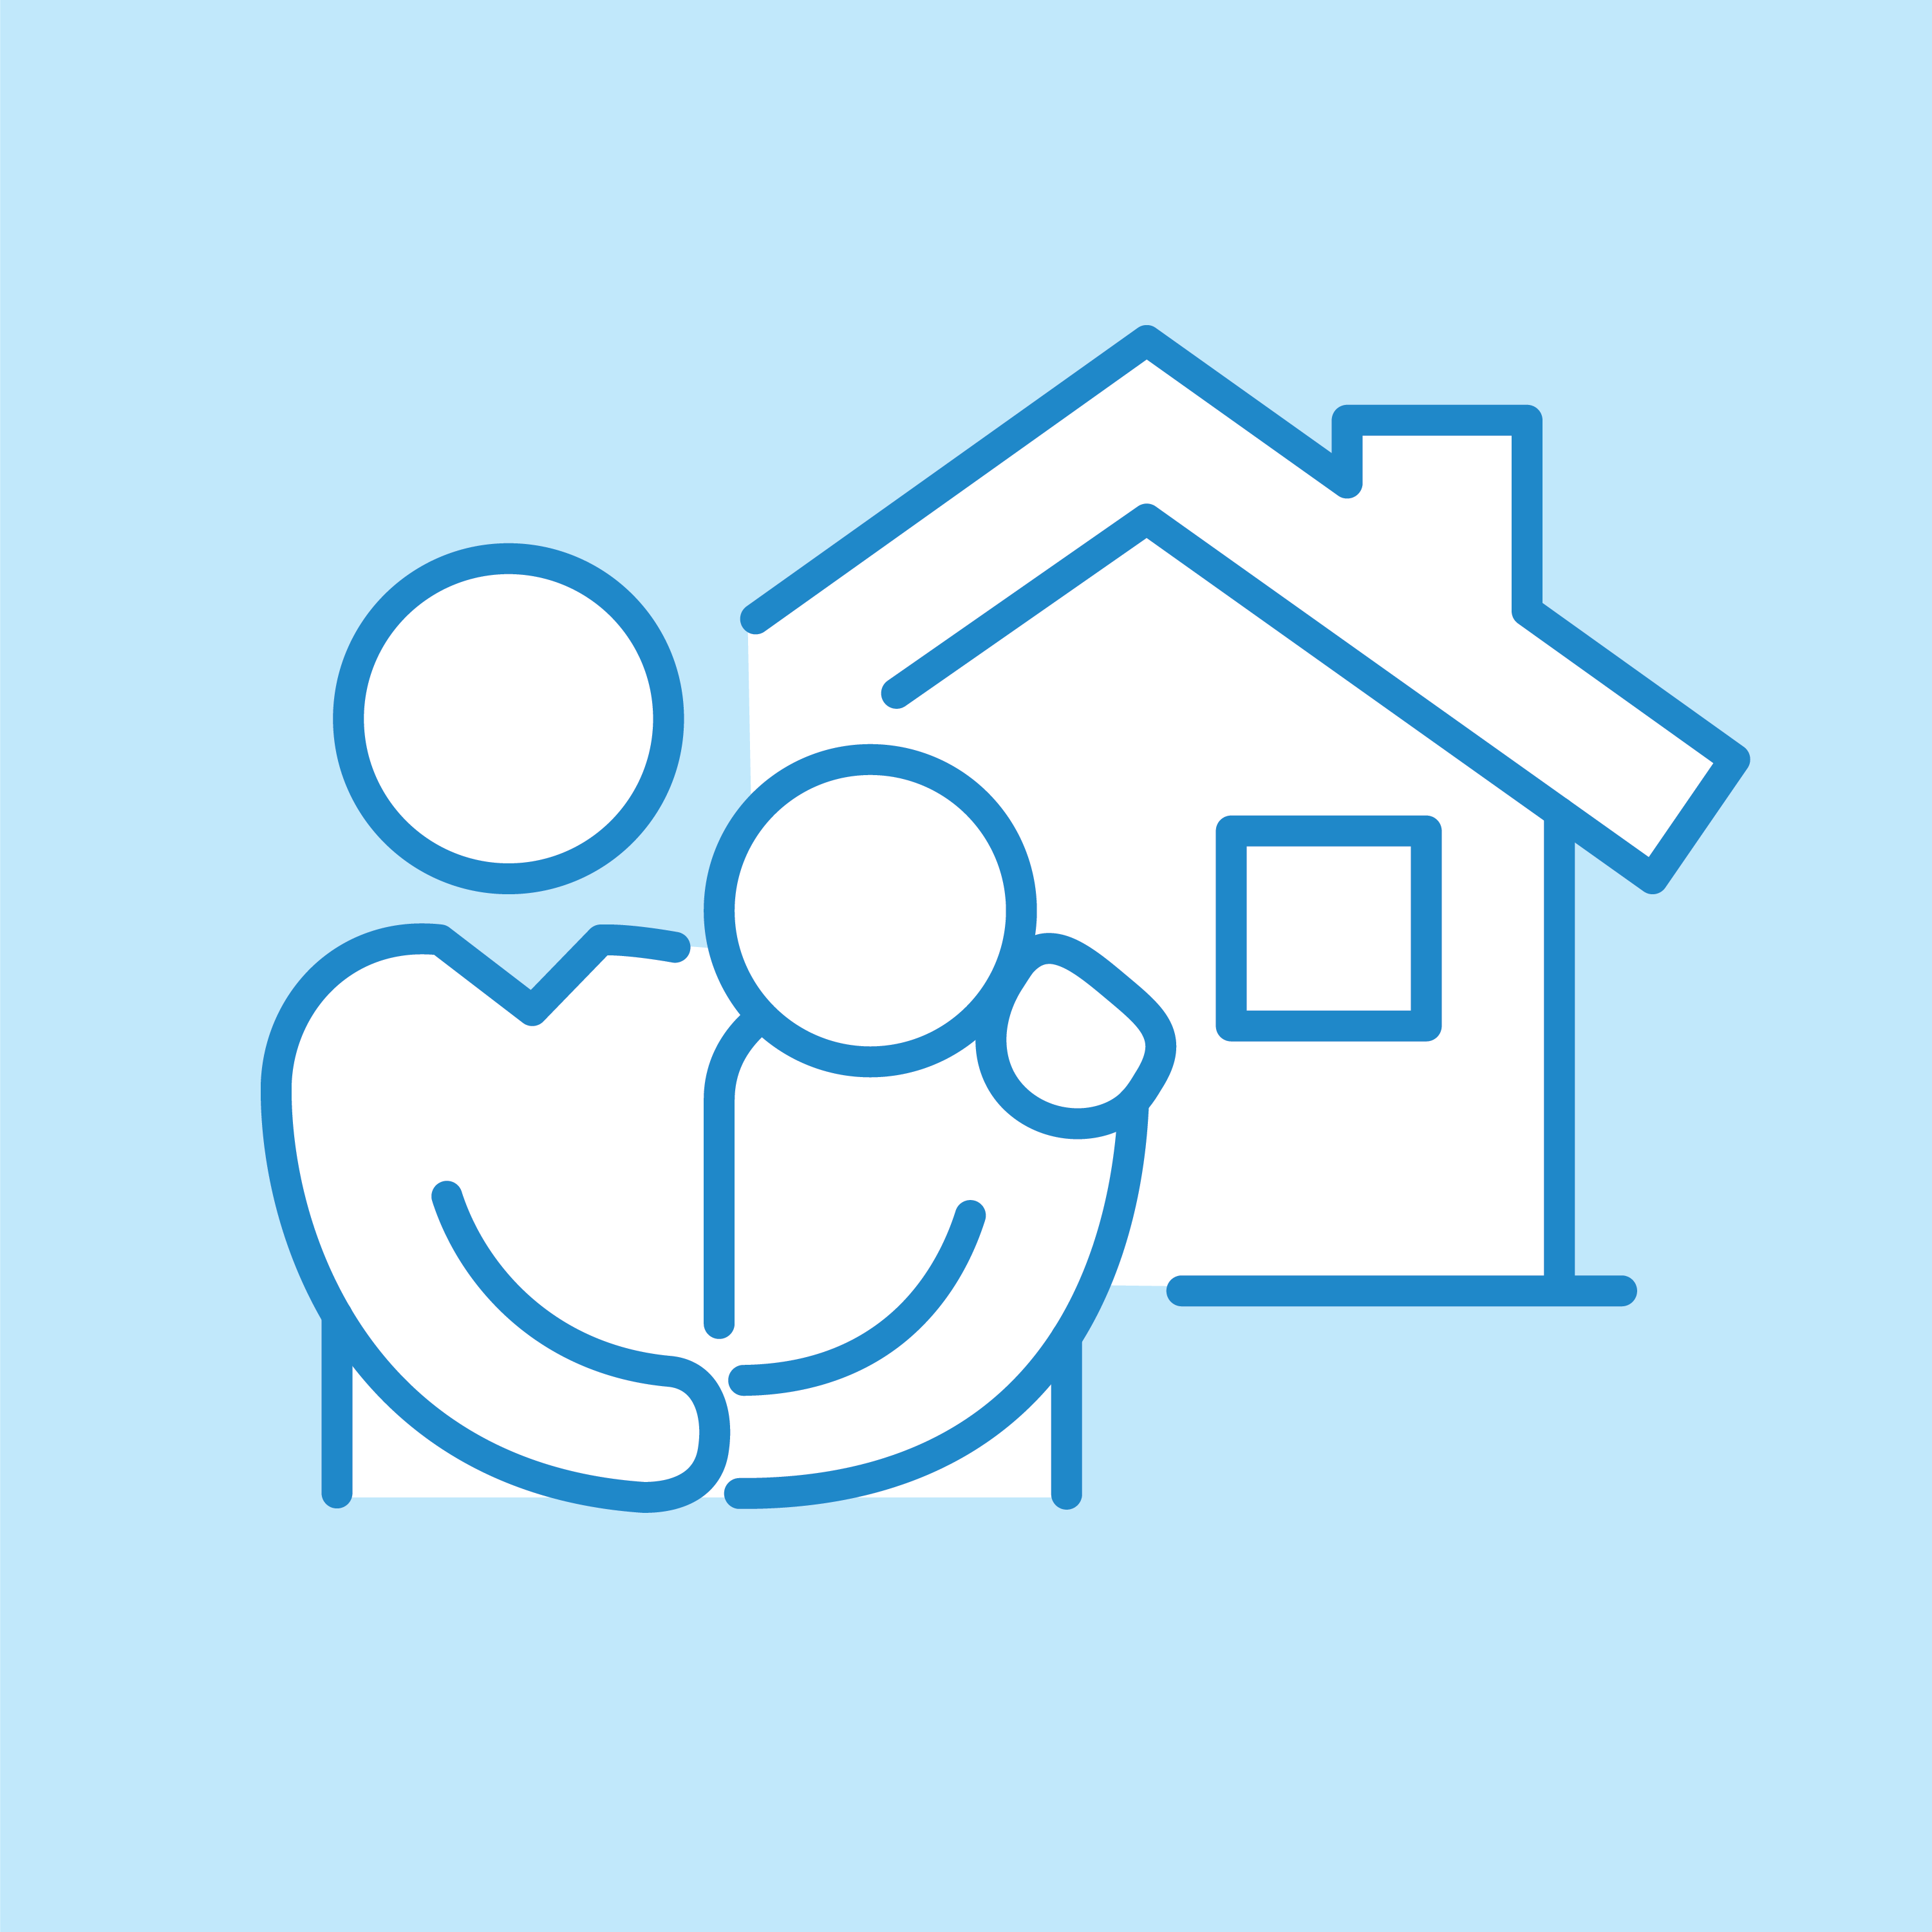 Improve home and community care icon.